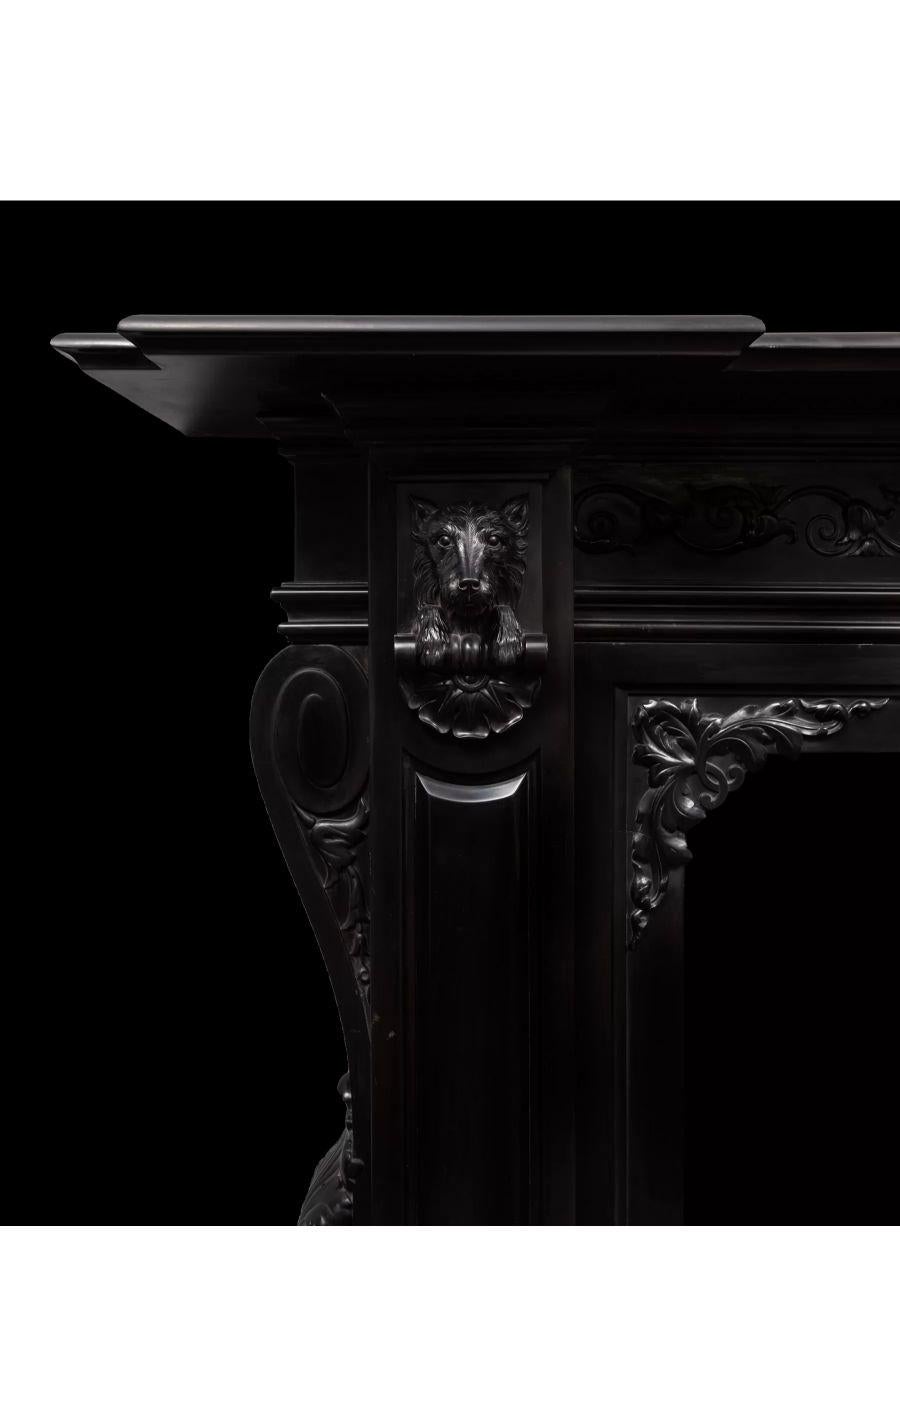 19th century black marble fireplace, circa 1860

An exceptional antique highly carved pure black marble fireplace dating to the 1860’s.

The jambs with scrolled acanthus consoles on the sides, raised and fielded panelled pilasters under carved